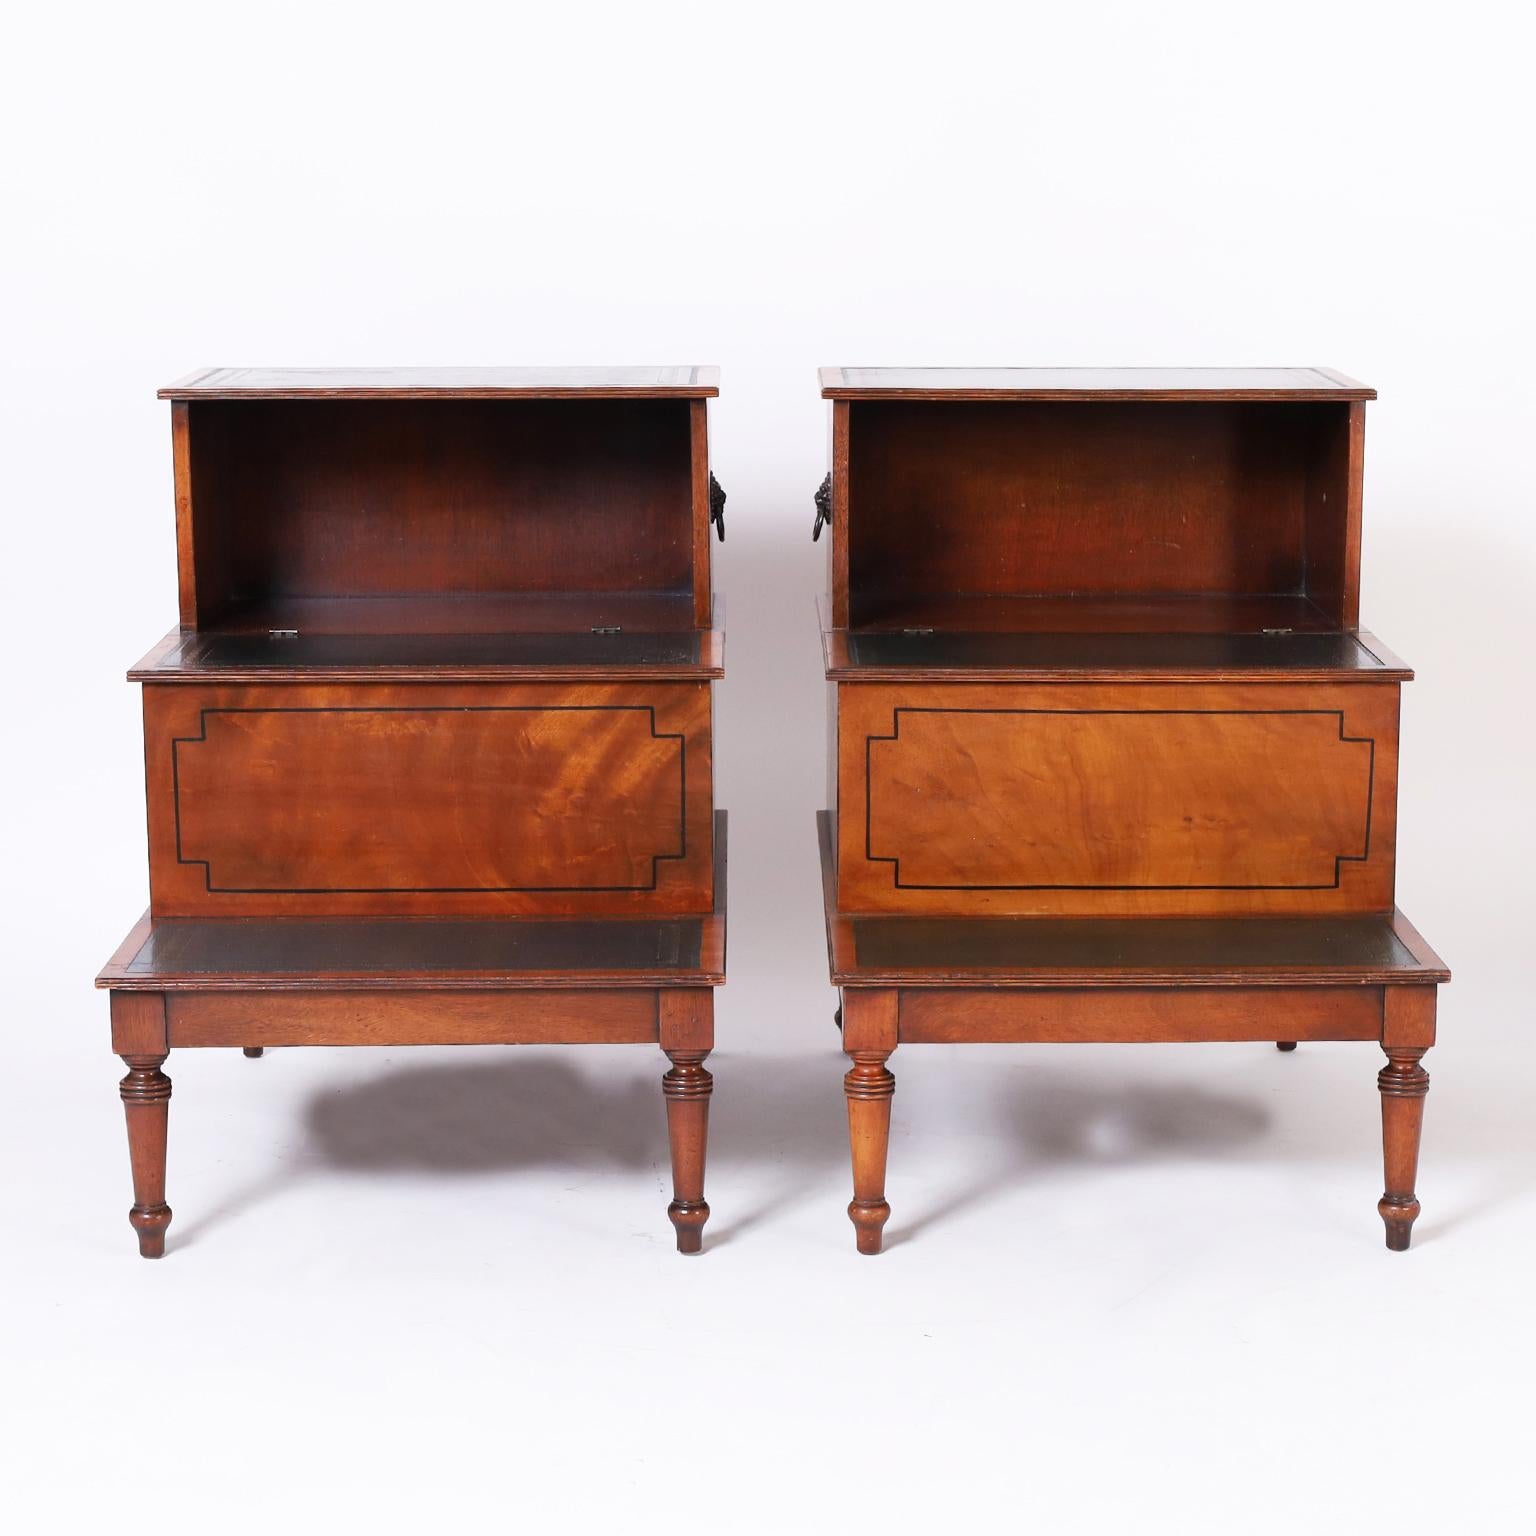 Handsome pair of antique English library step form stands crafted in mahogany with tooled green leather steps, storage under the middle, brass lion head hardware, and classic turned legs.